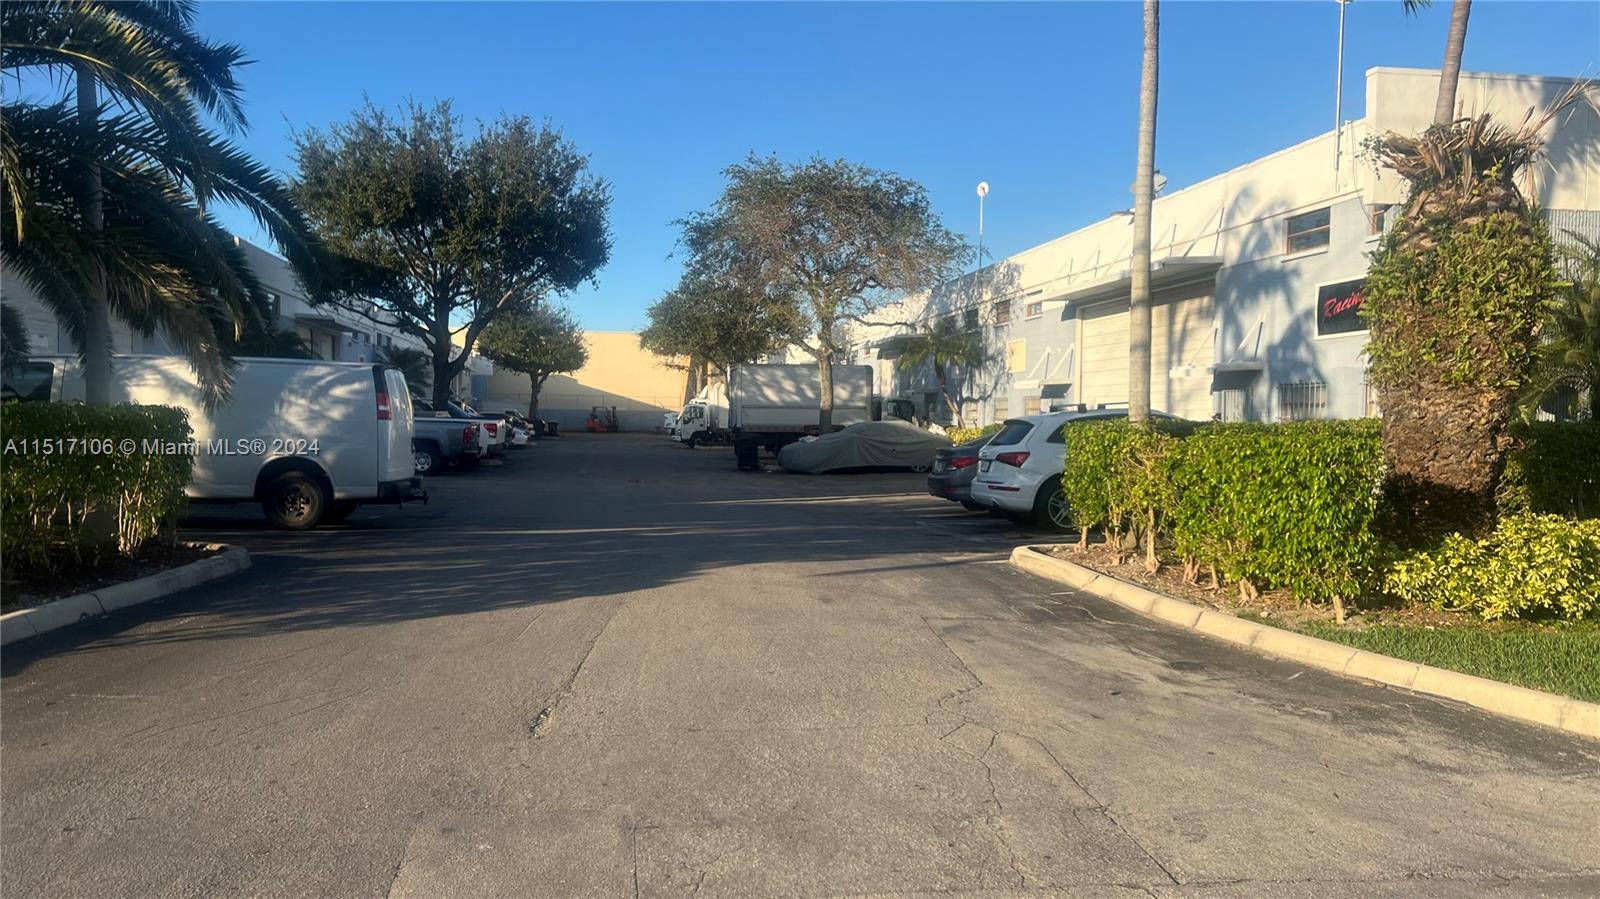 Excellent office Warehouse combination in Medley and Doral Area !